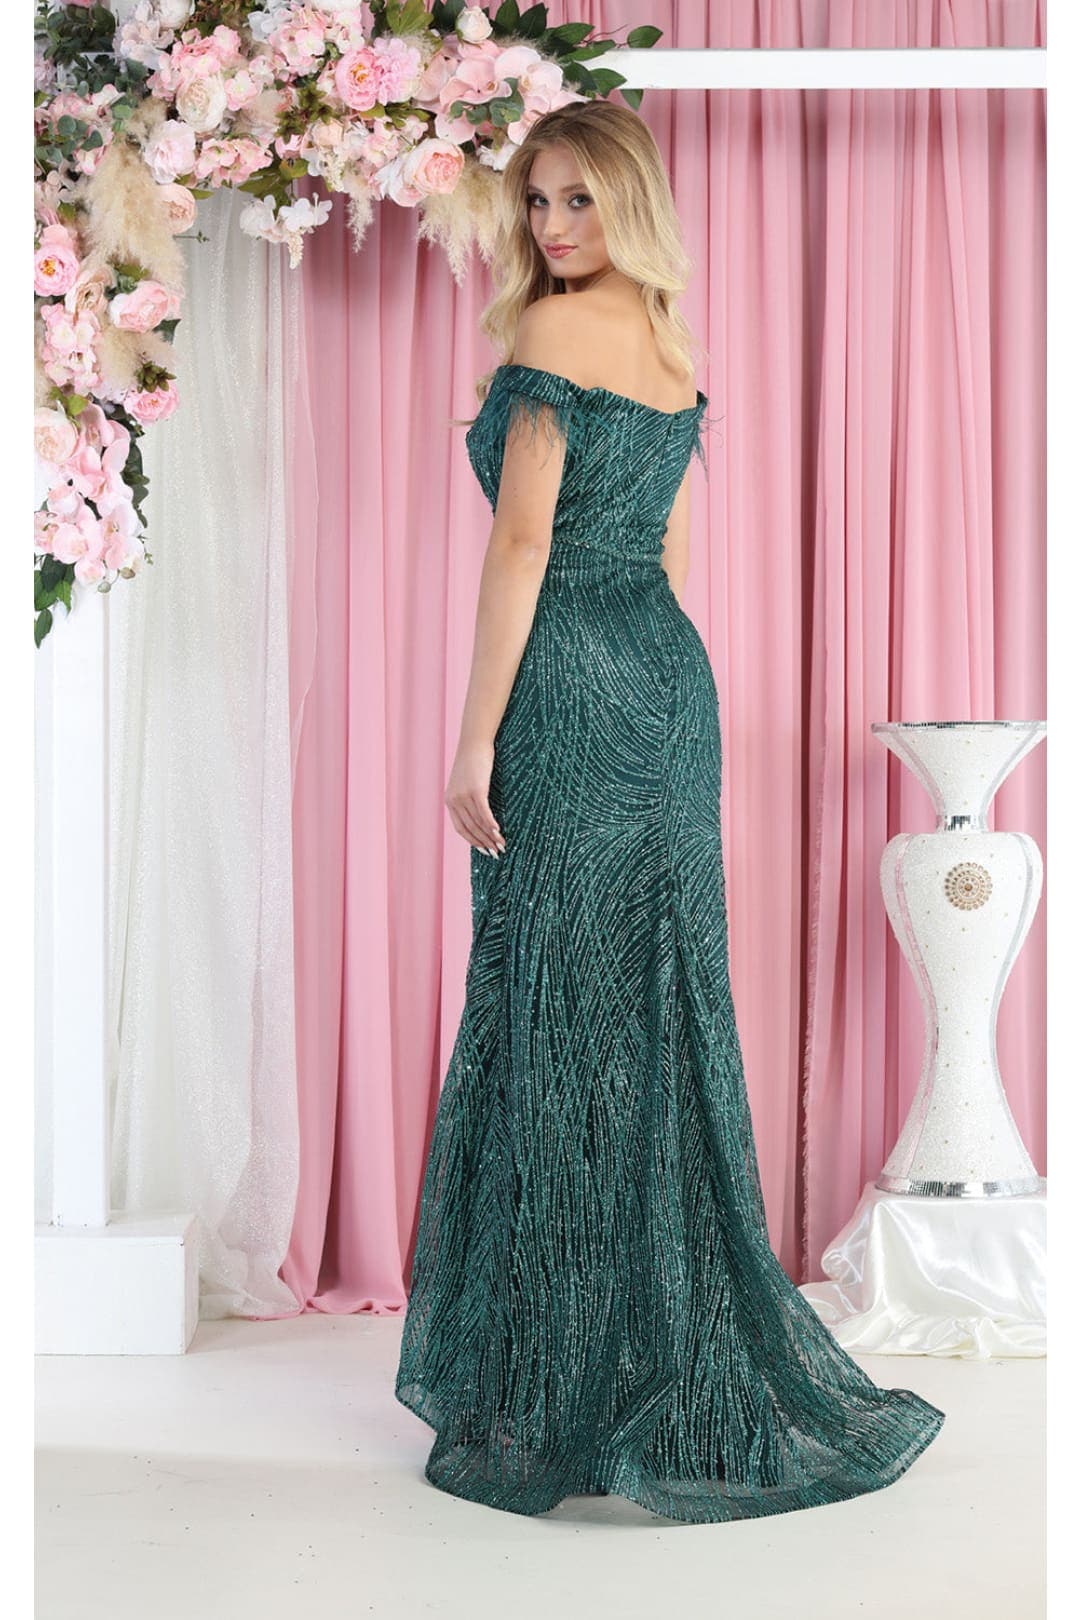 Royal Queen RQ7963 Off The Shoulder Feathers Prom Gown - Dress